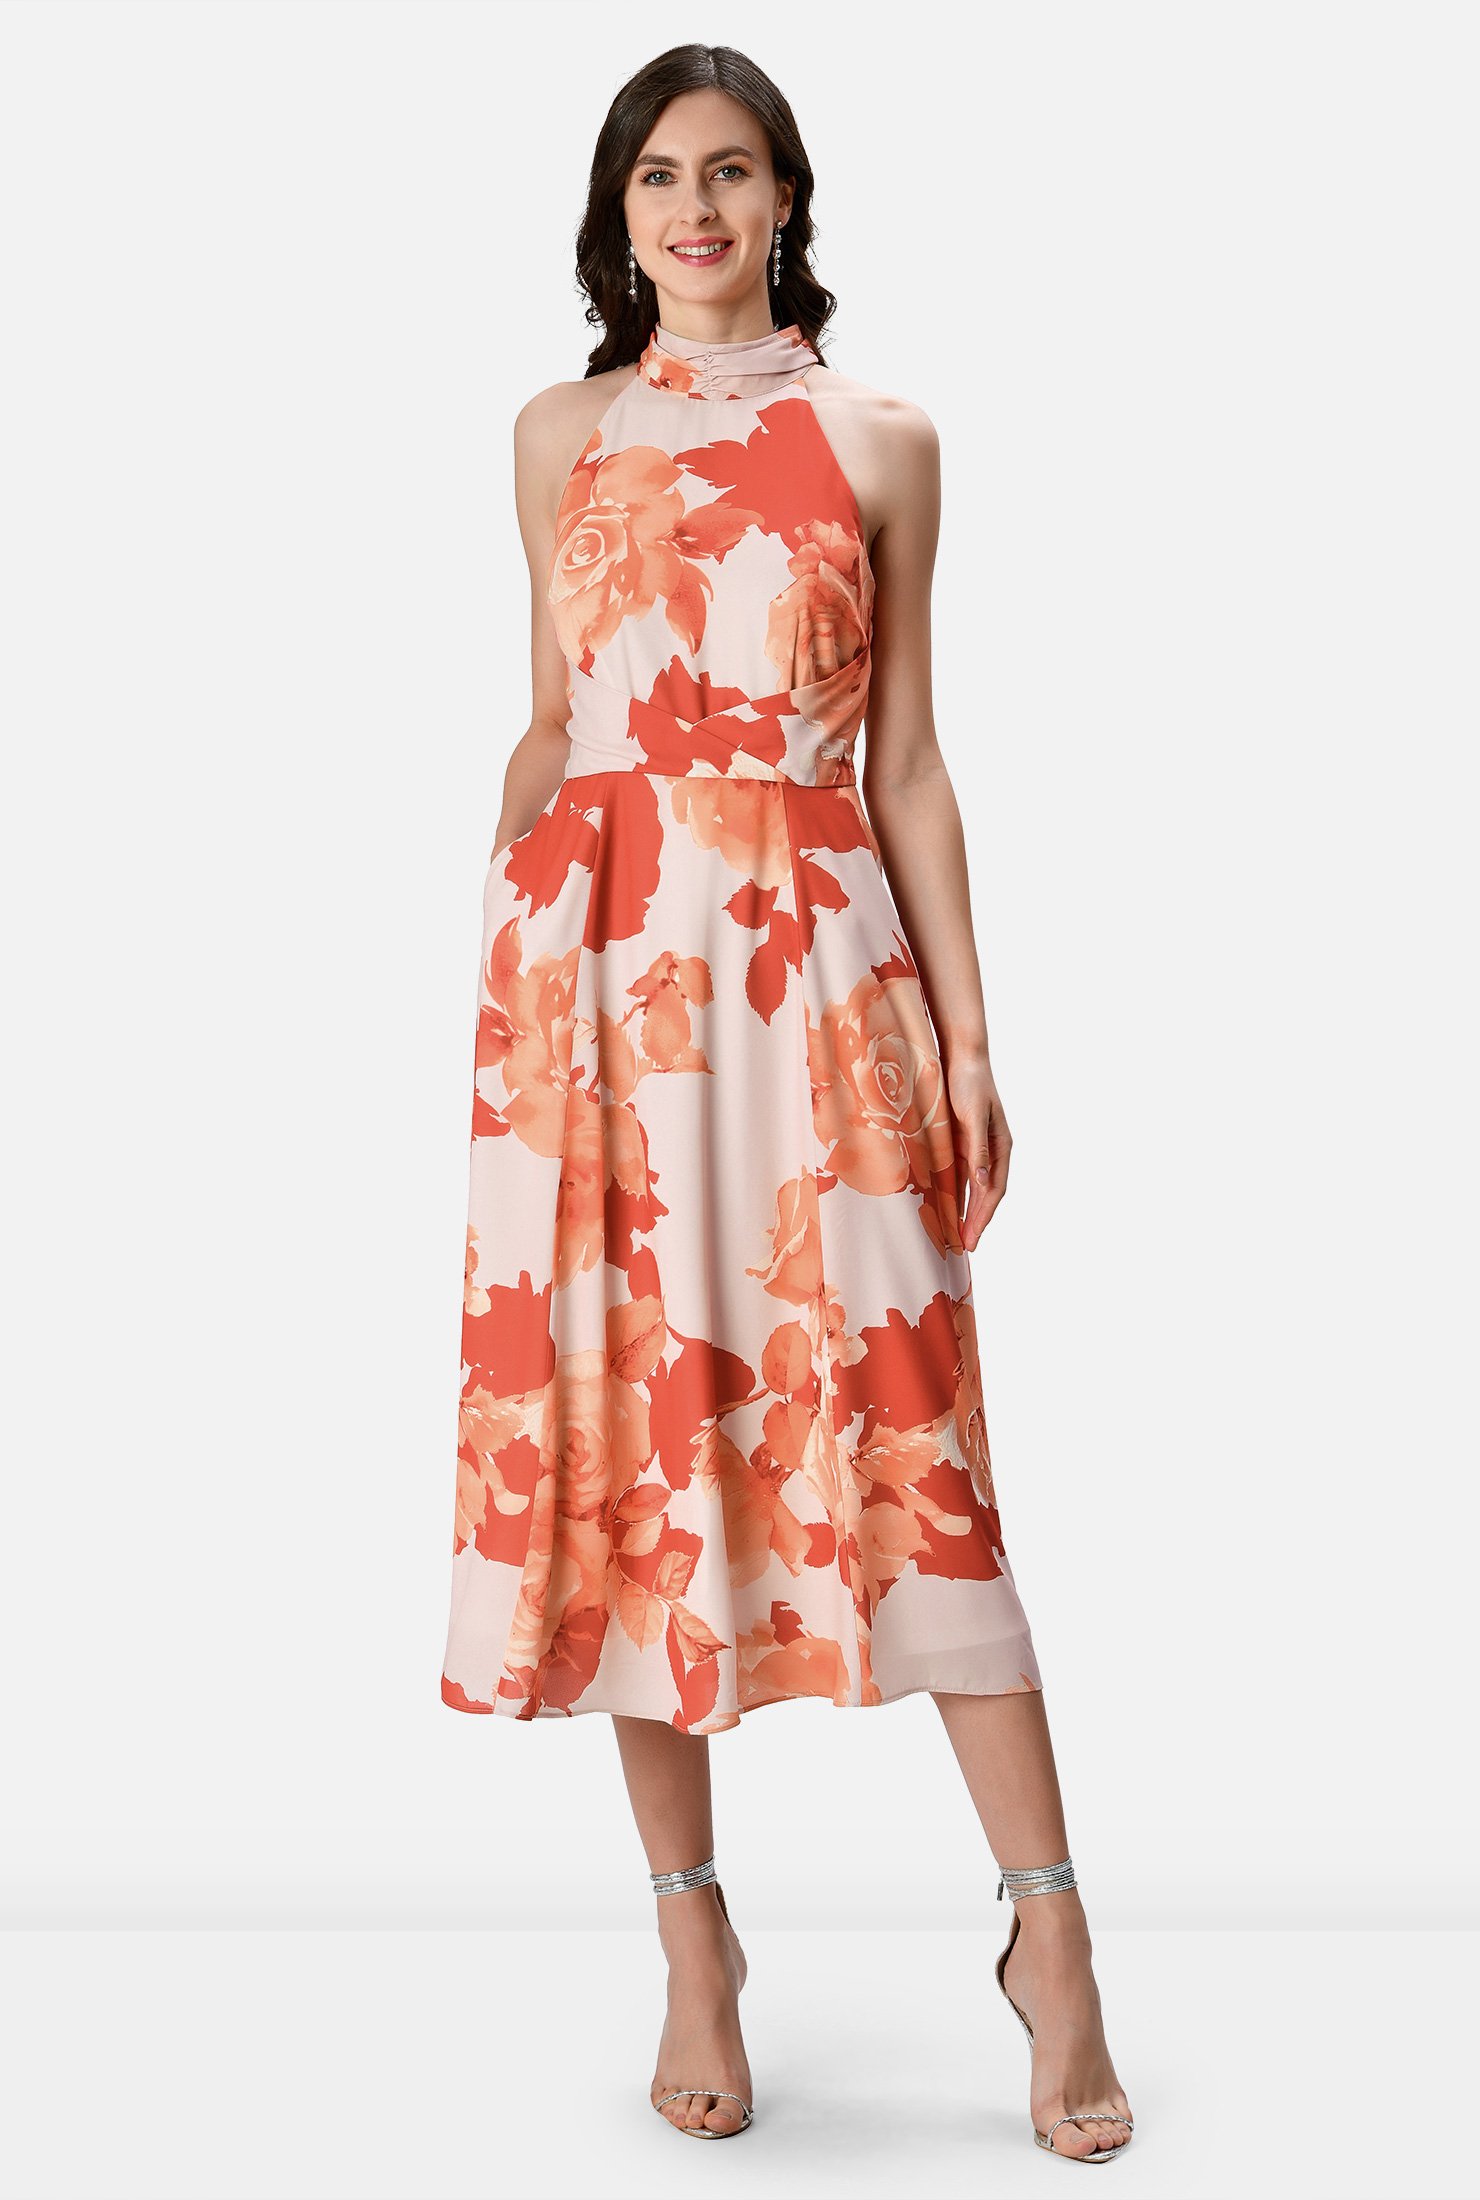 Golden hour favorite! Feel the breeze and the sun on your shoulders in our rose print crepe dress with a halter neck and a crossed front waist atop a full flare skirt that makes it a perfect choice for an unforgettable party.